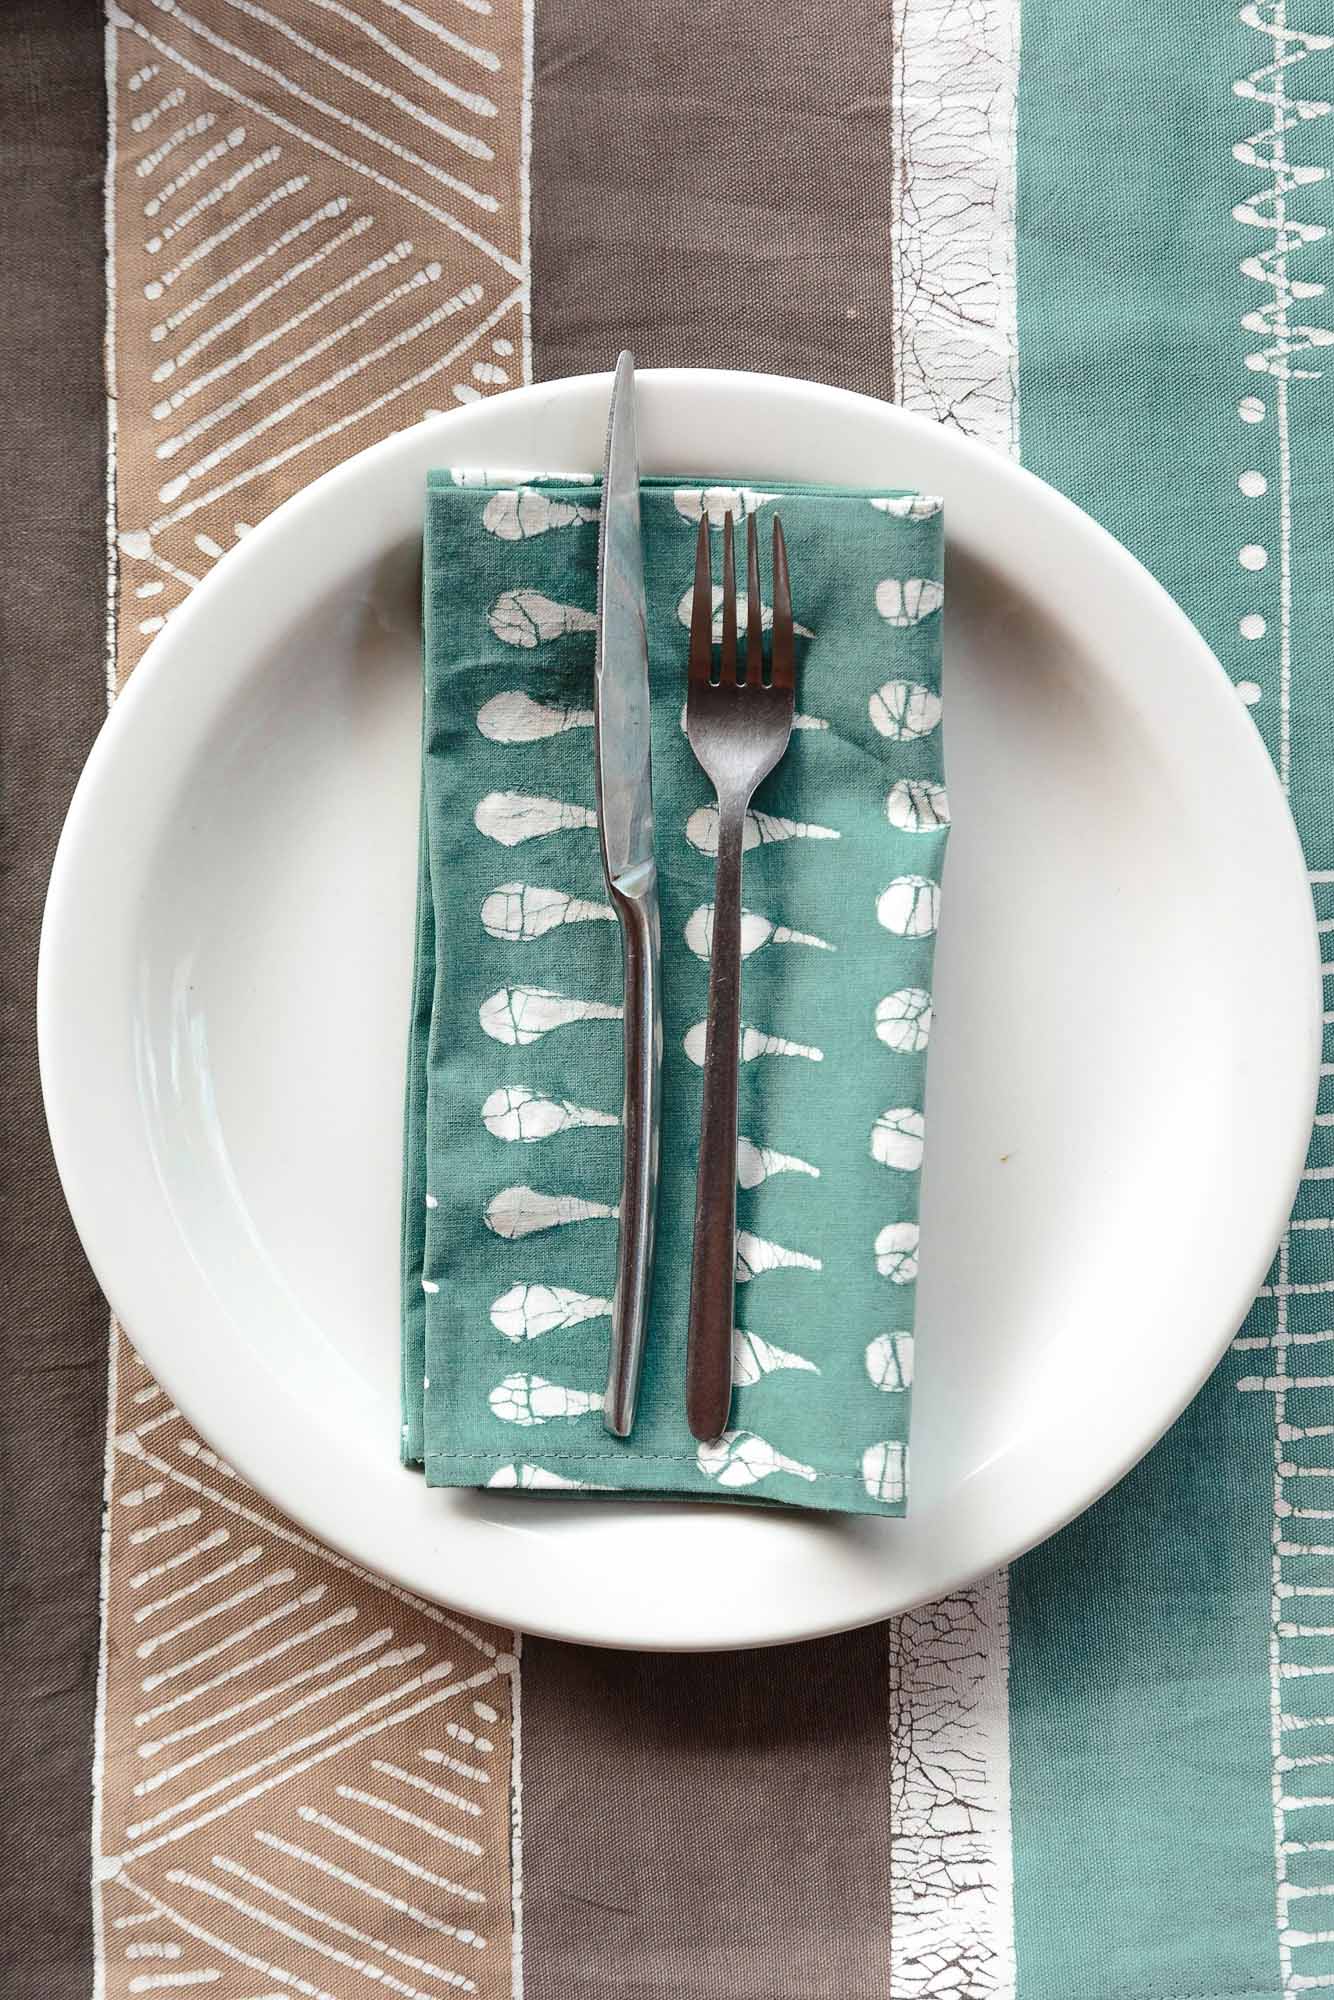 Boho Teal Drops Napkin Set - Hand Painted by TRIBAL TEXTILES - Handcrafted Home Decor Interiors - African Made